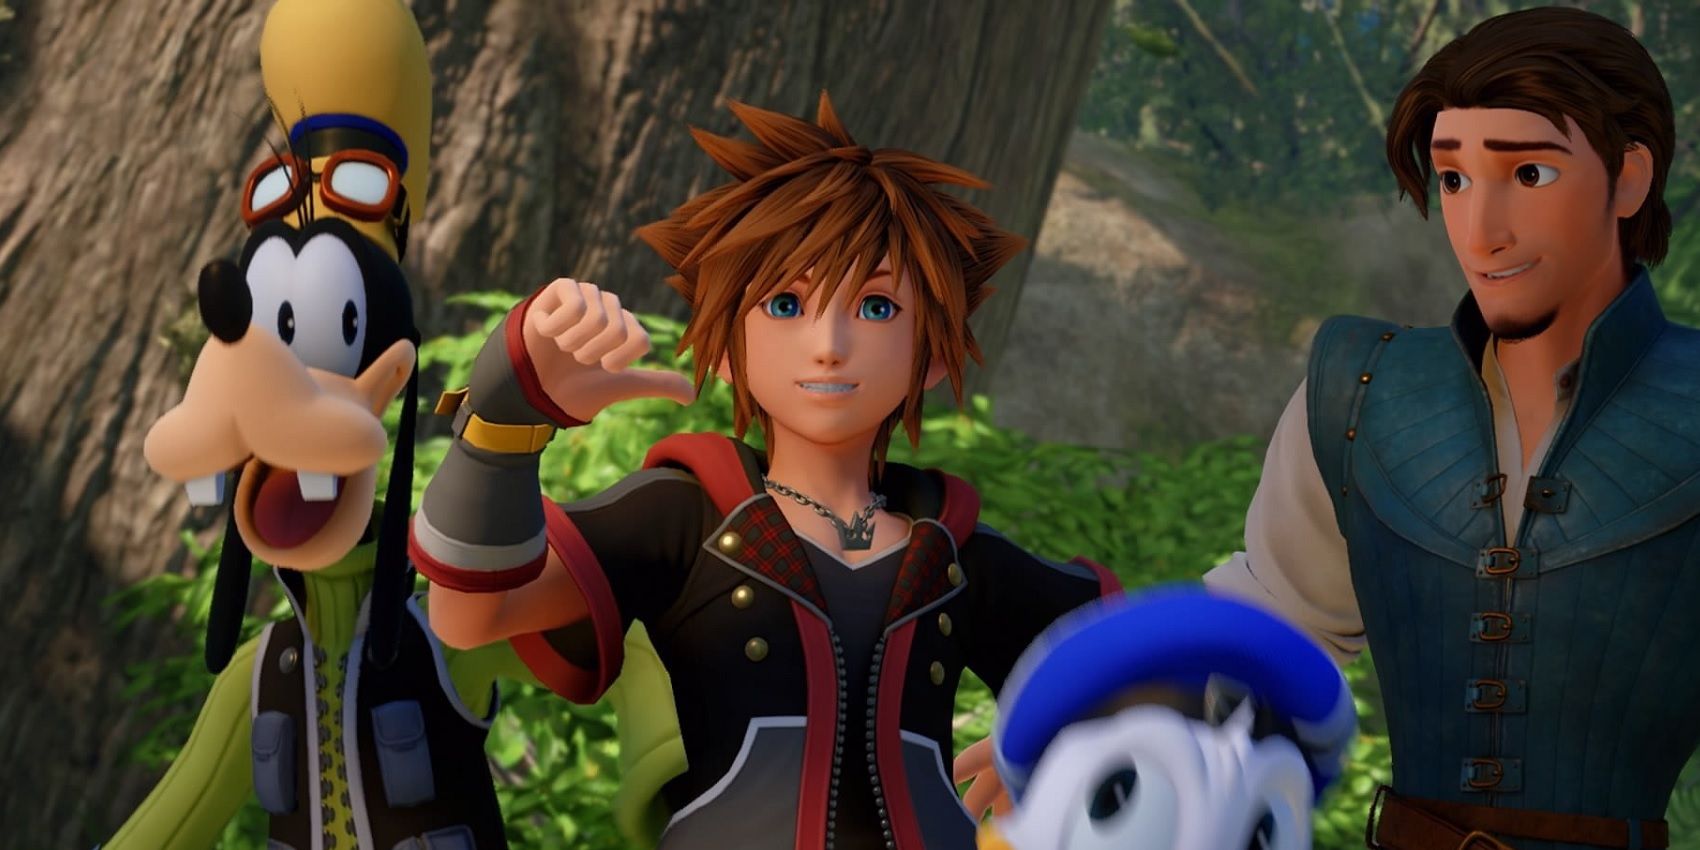 10 Things You Didn’t Know About The Kingdom Hearts Video Games